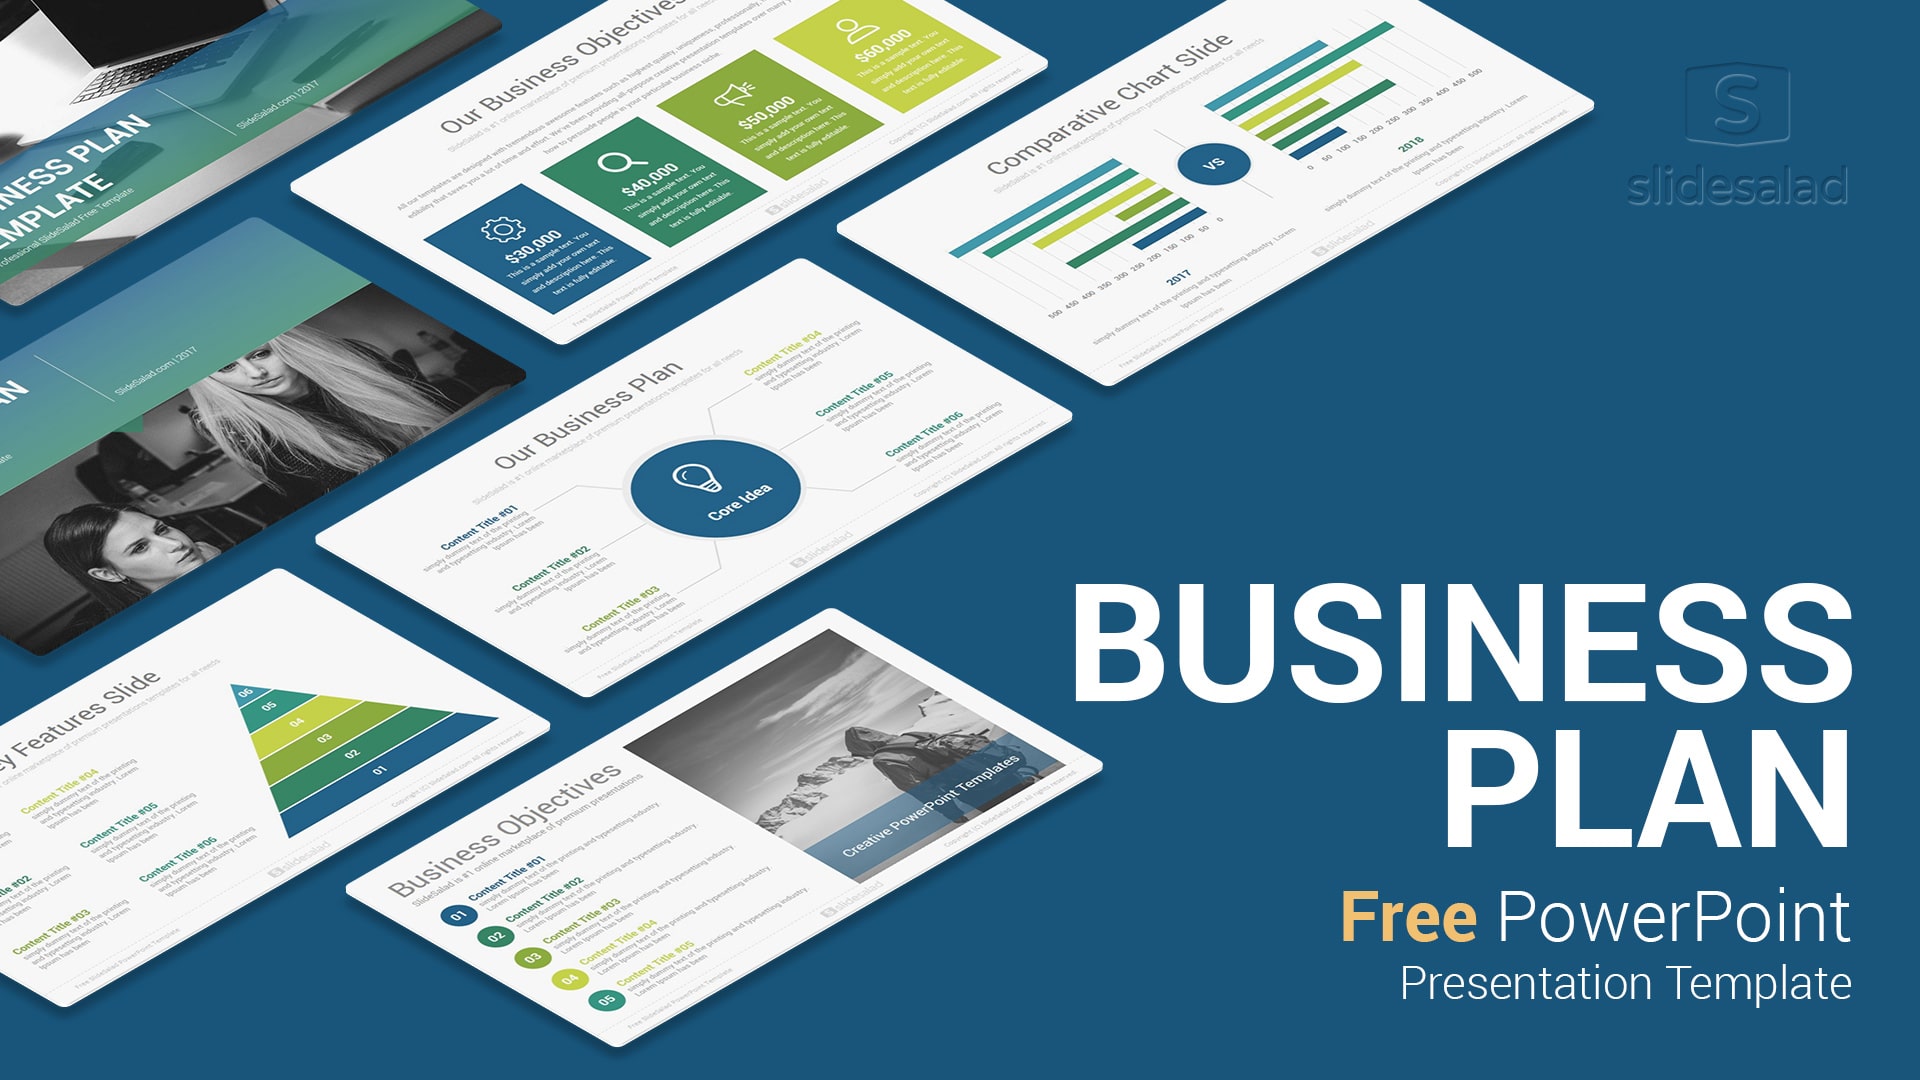 Business Plan Free PowerPoint Presentation Template - SlideSalad With Business Profile Template Ppt